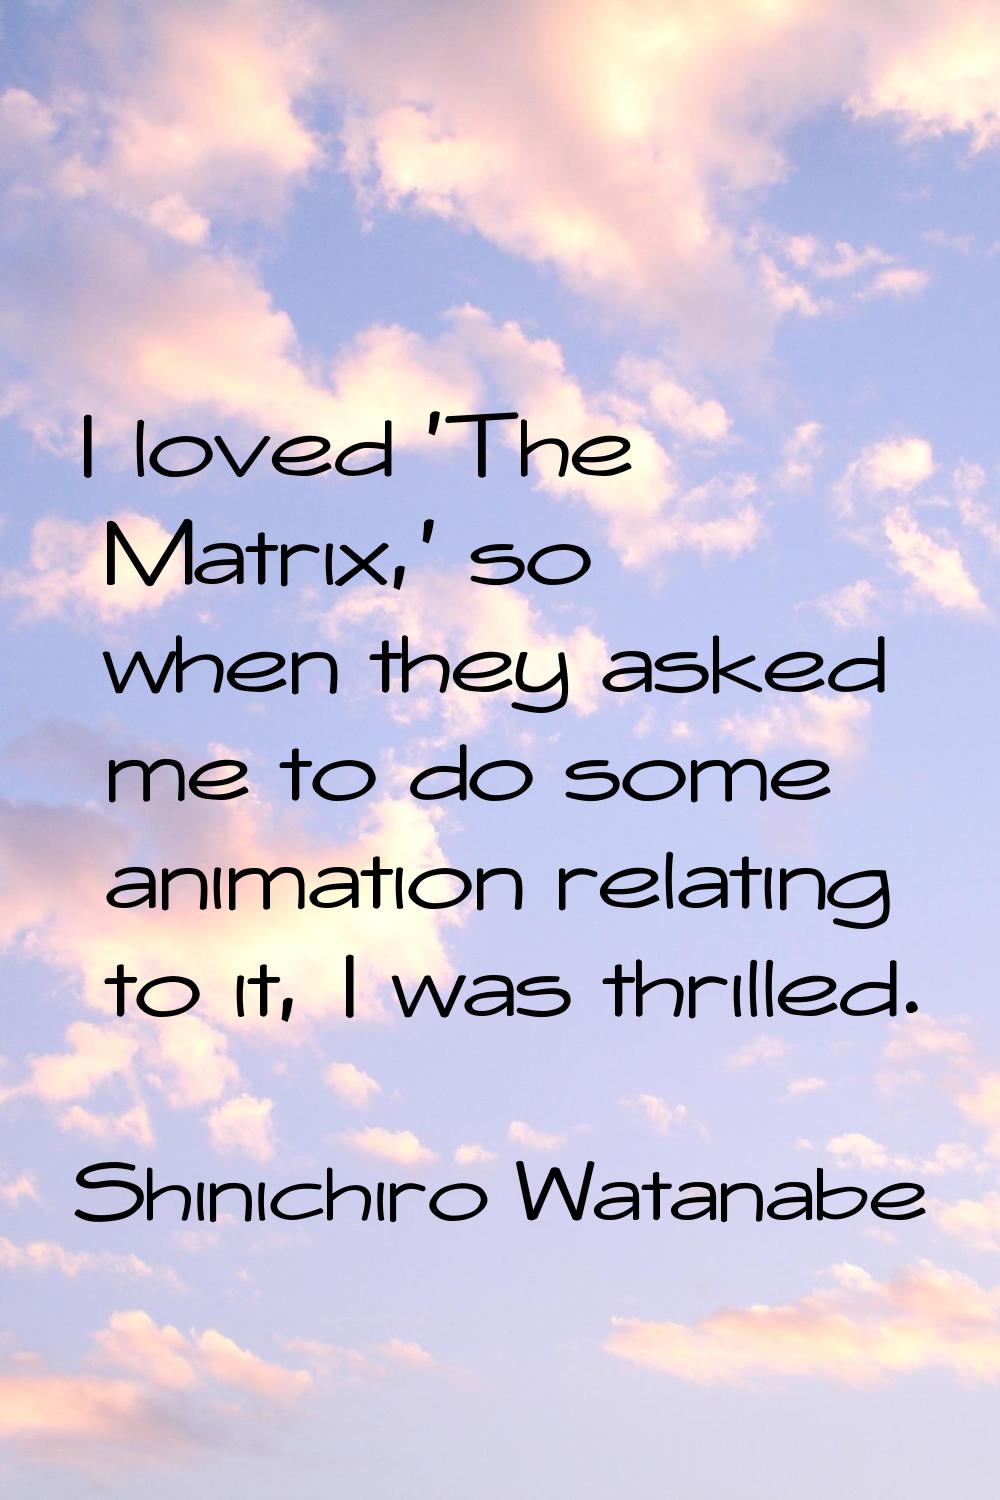 I loved 'The Matrix,' so when they asked me to do some animation relating to it, I was thrilled.